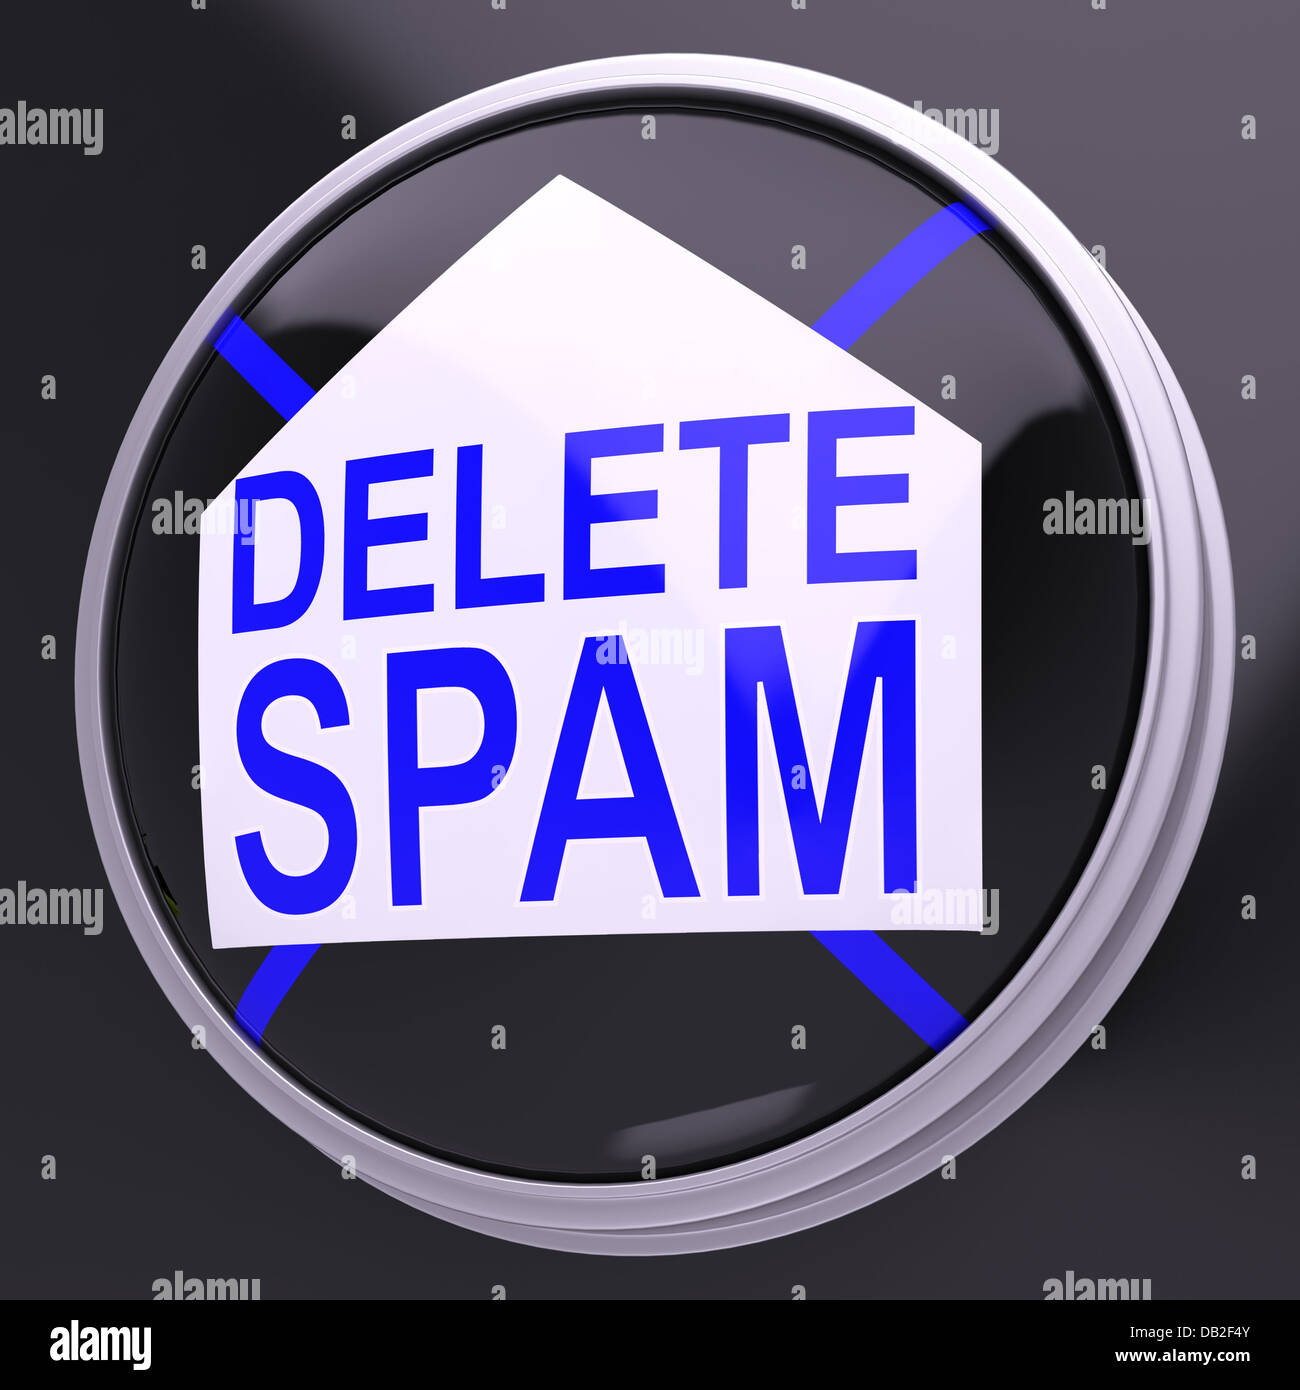 Delete Spam Shows Unwanted Undesired Trash Mail Stock Photo